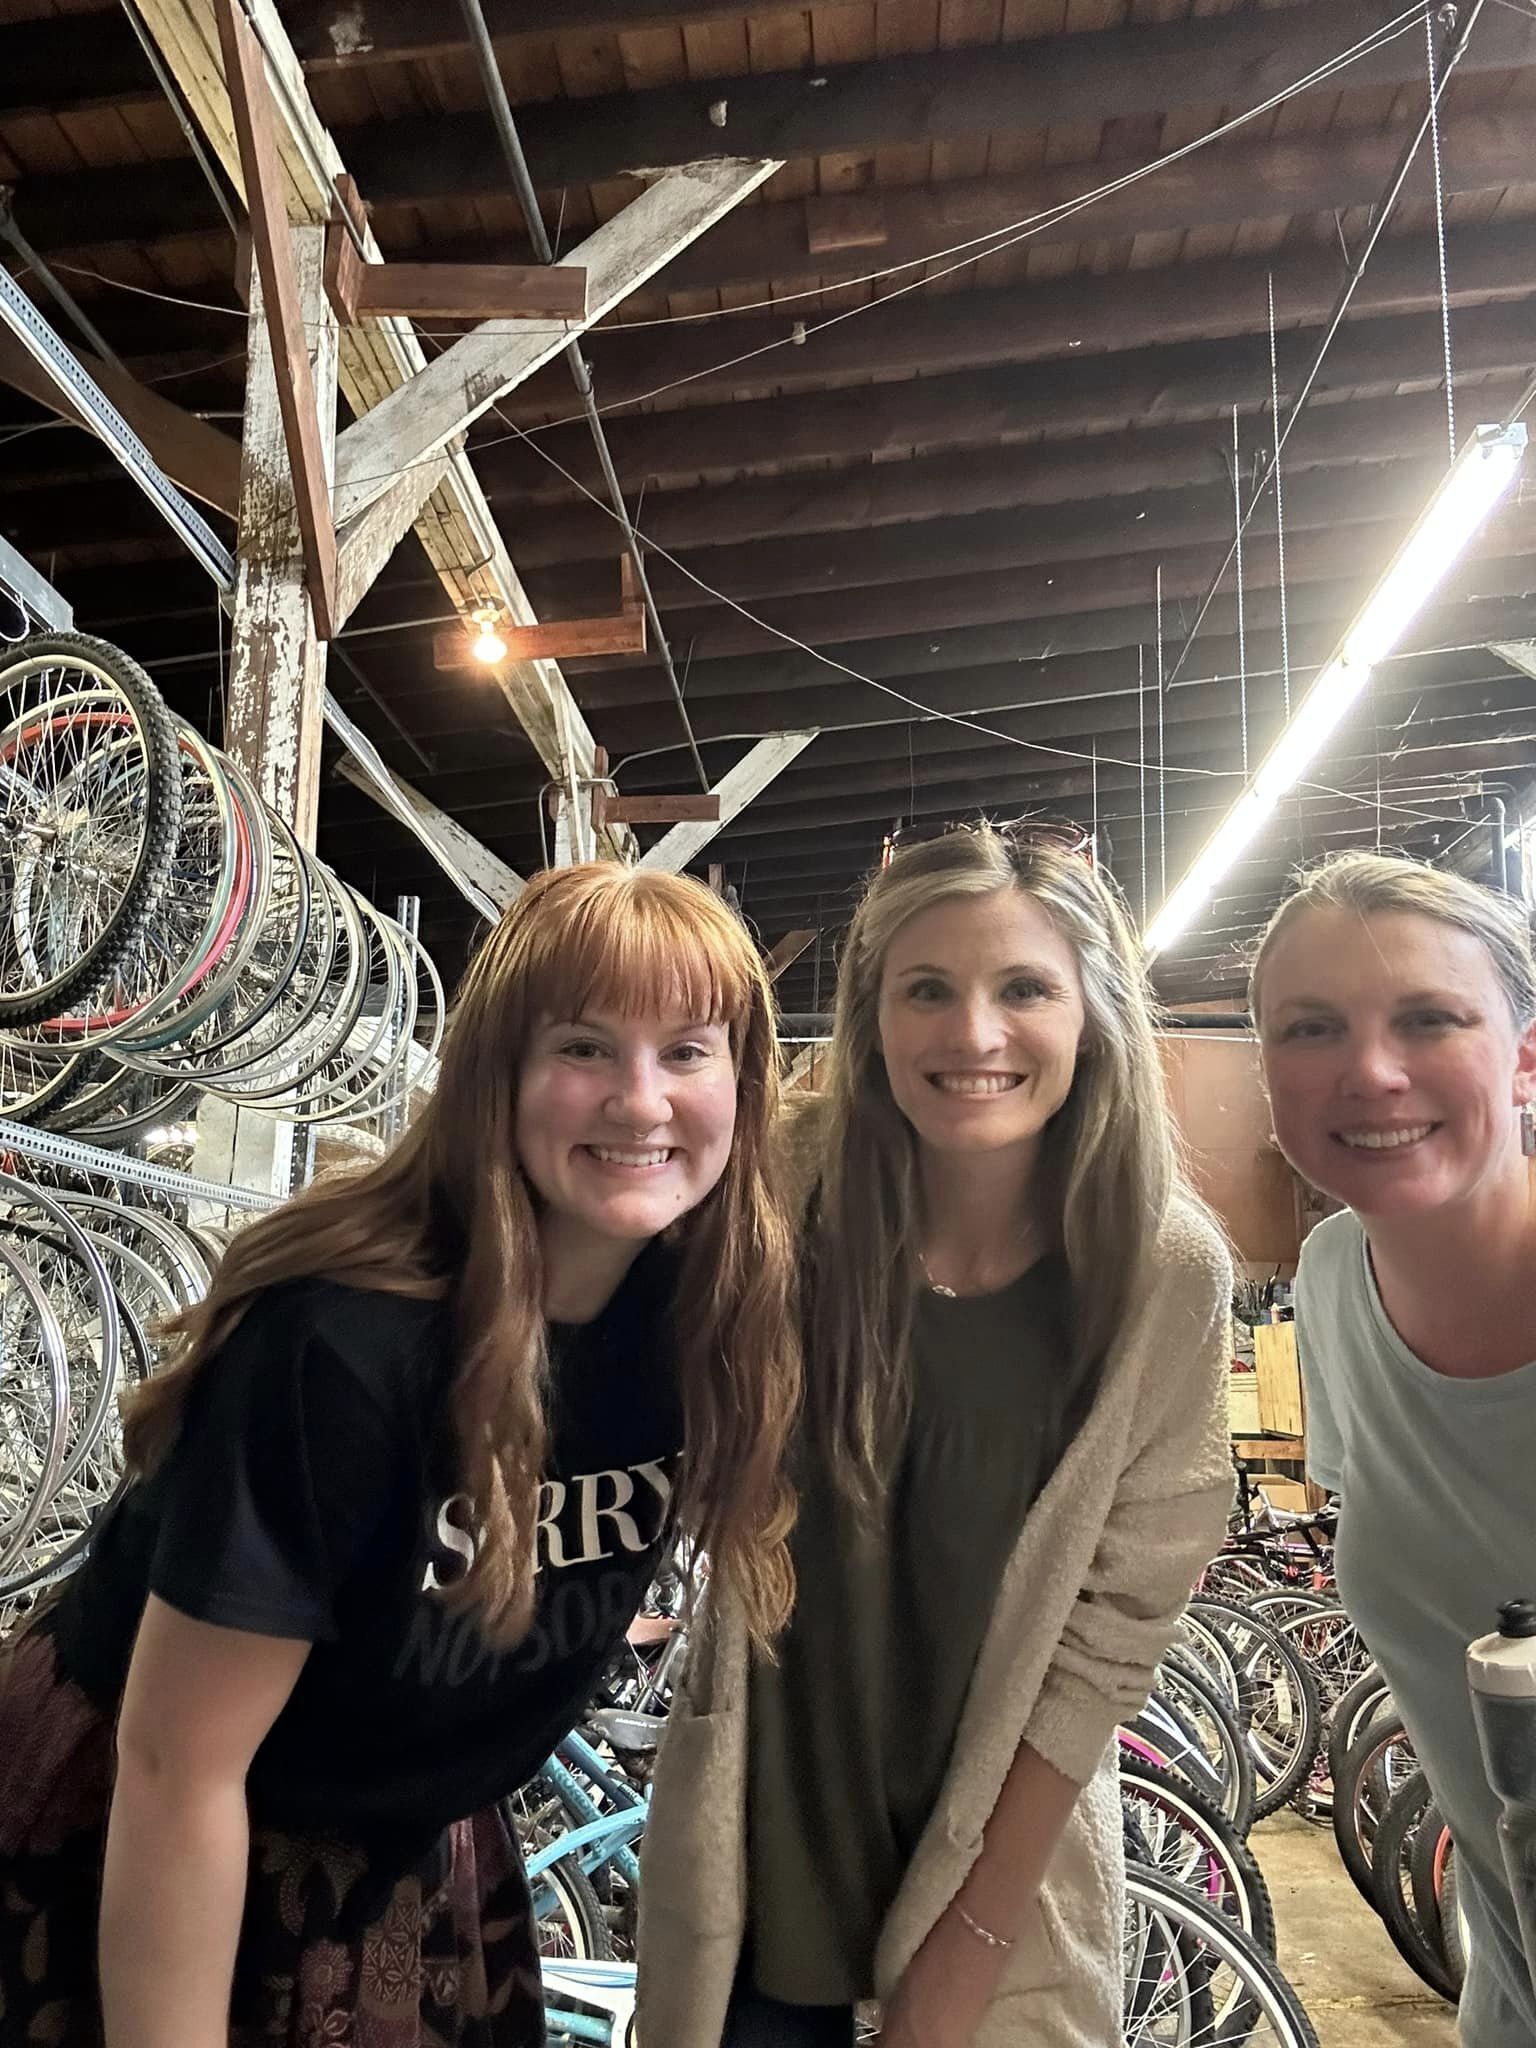 Volunteering at Recycle Bikes with Midtown Health Alliance 